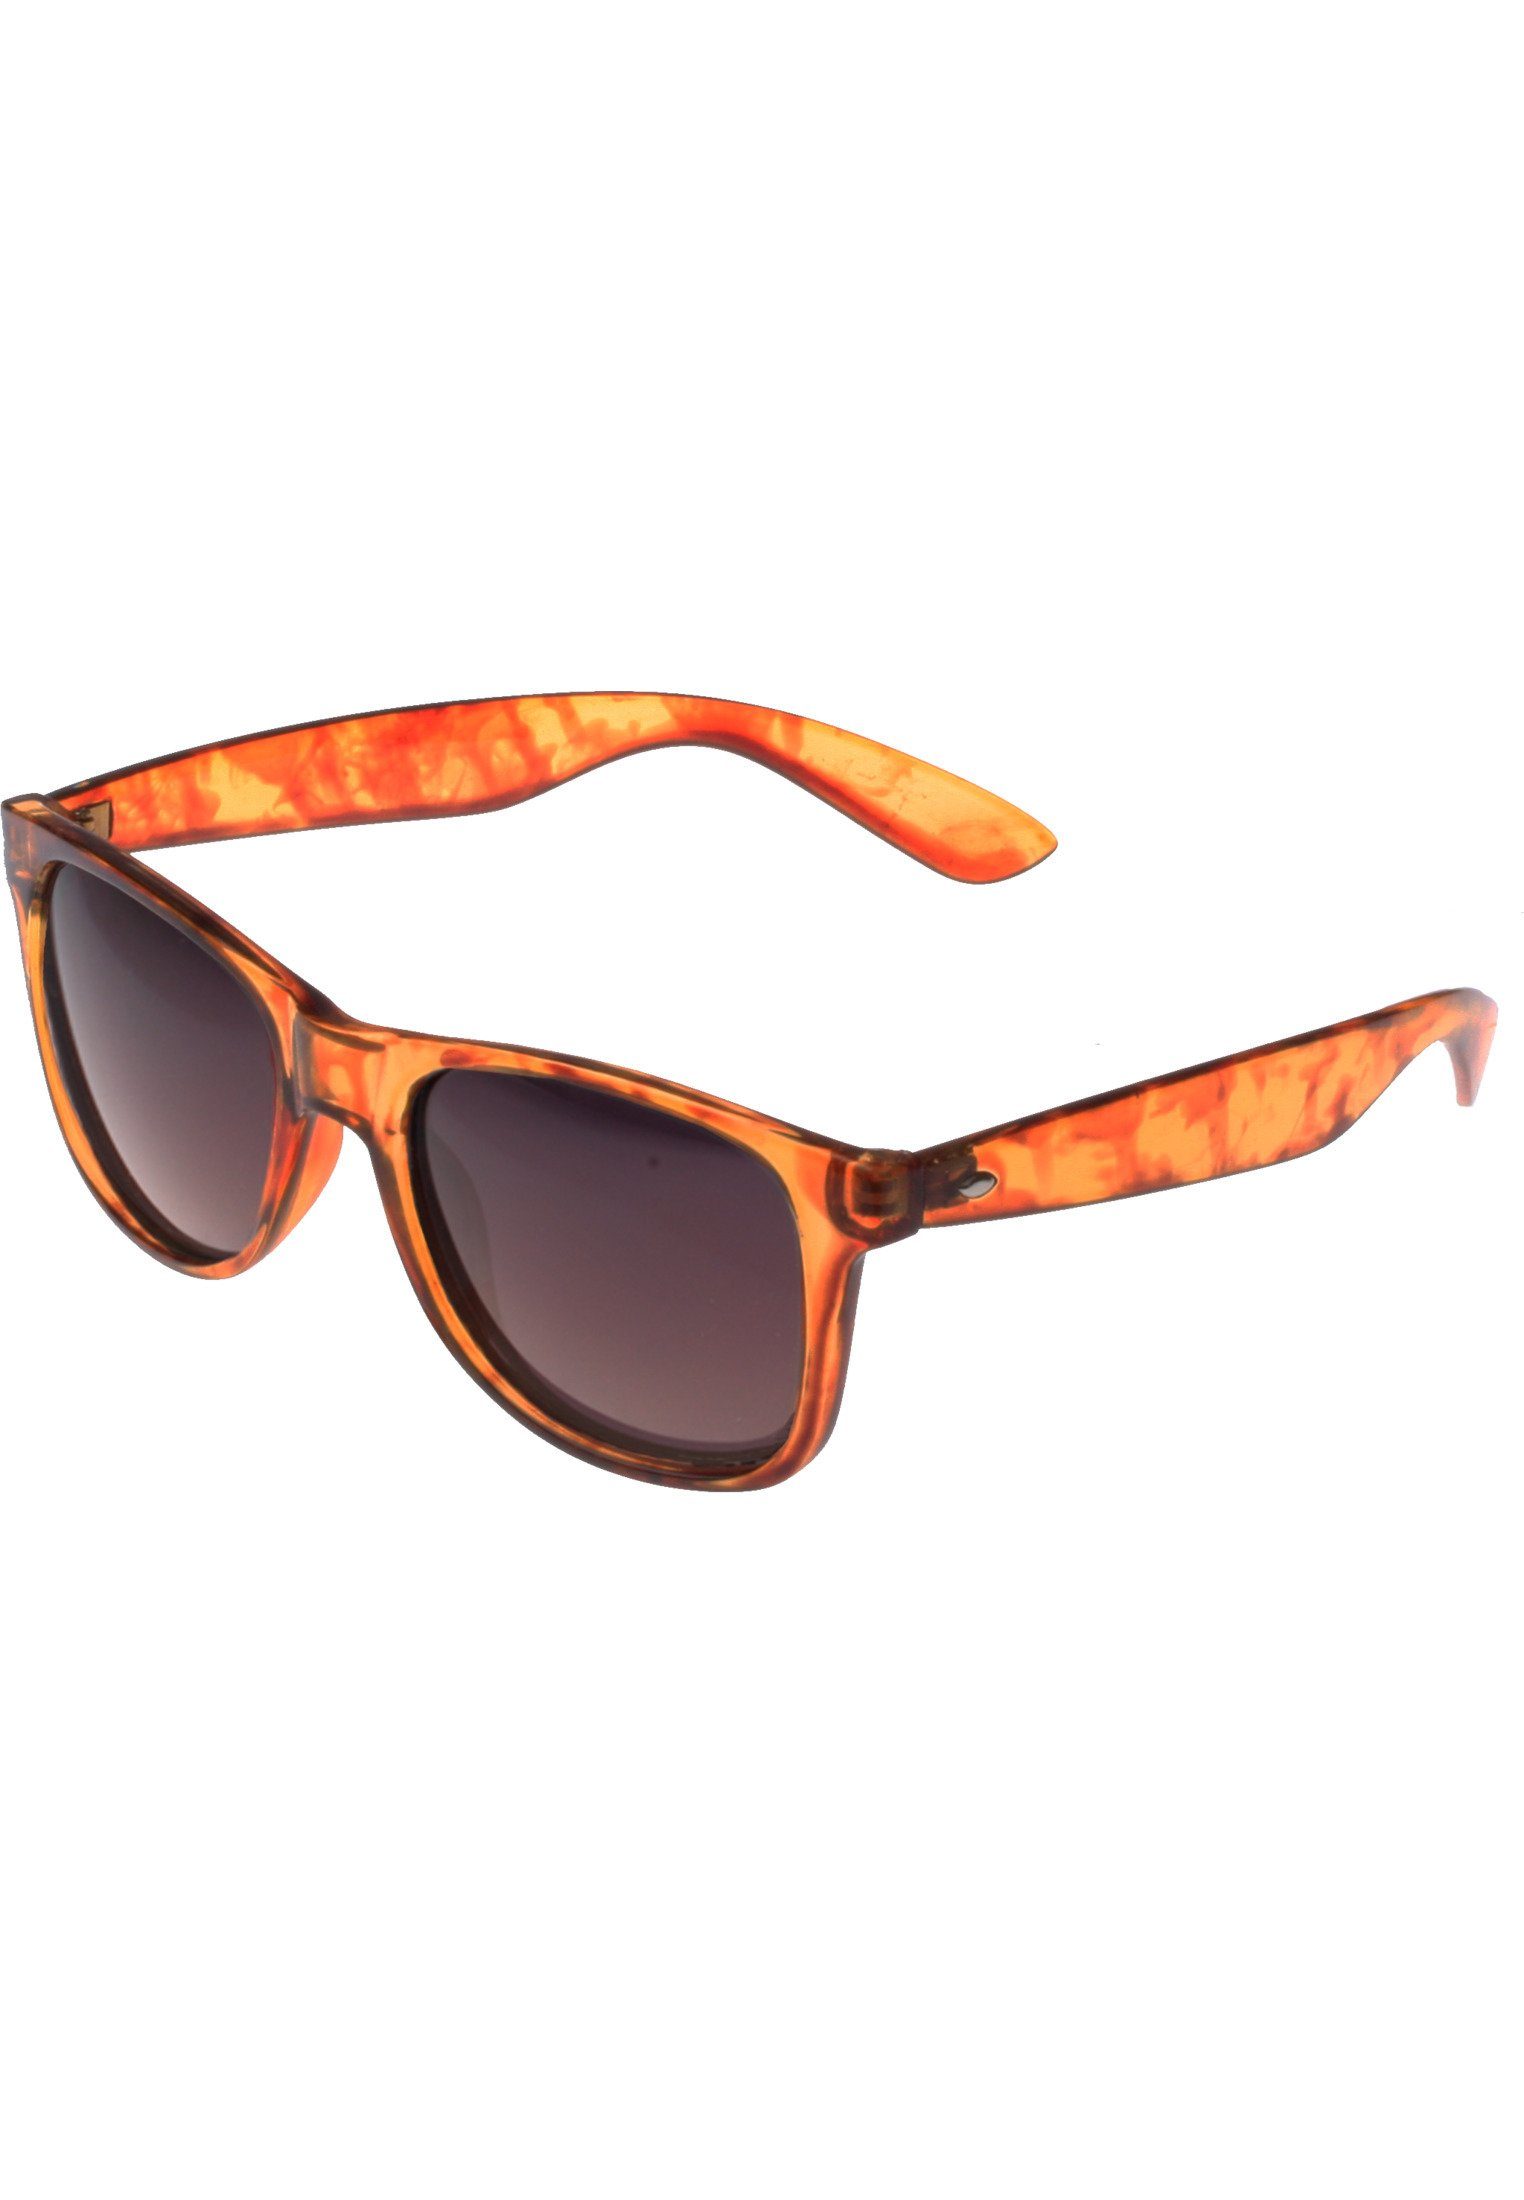 MSTRDS Sonnenbrille Accessoires Groove Shades GStwo amber